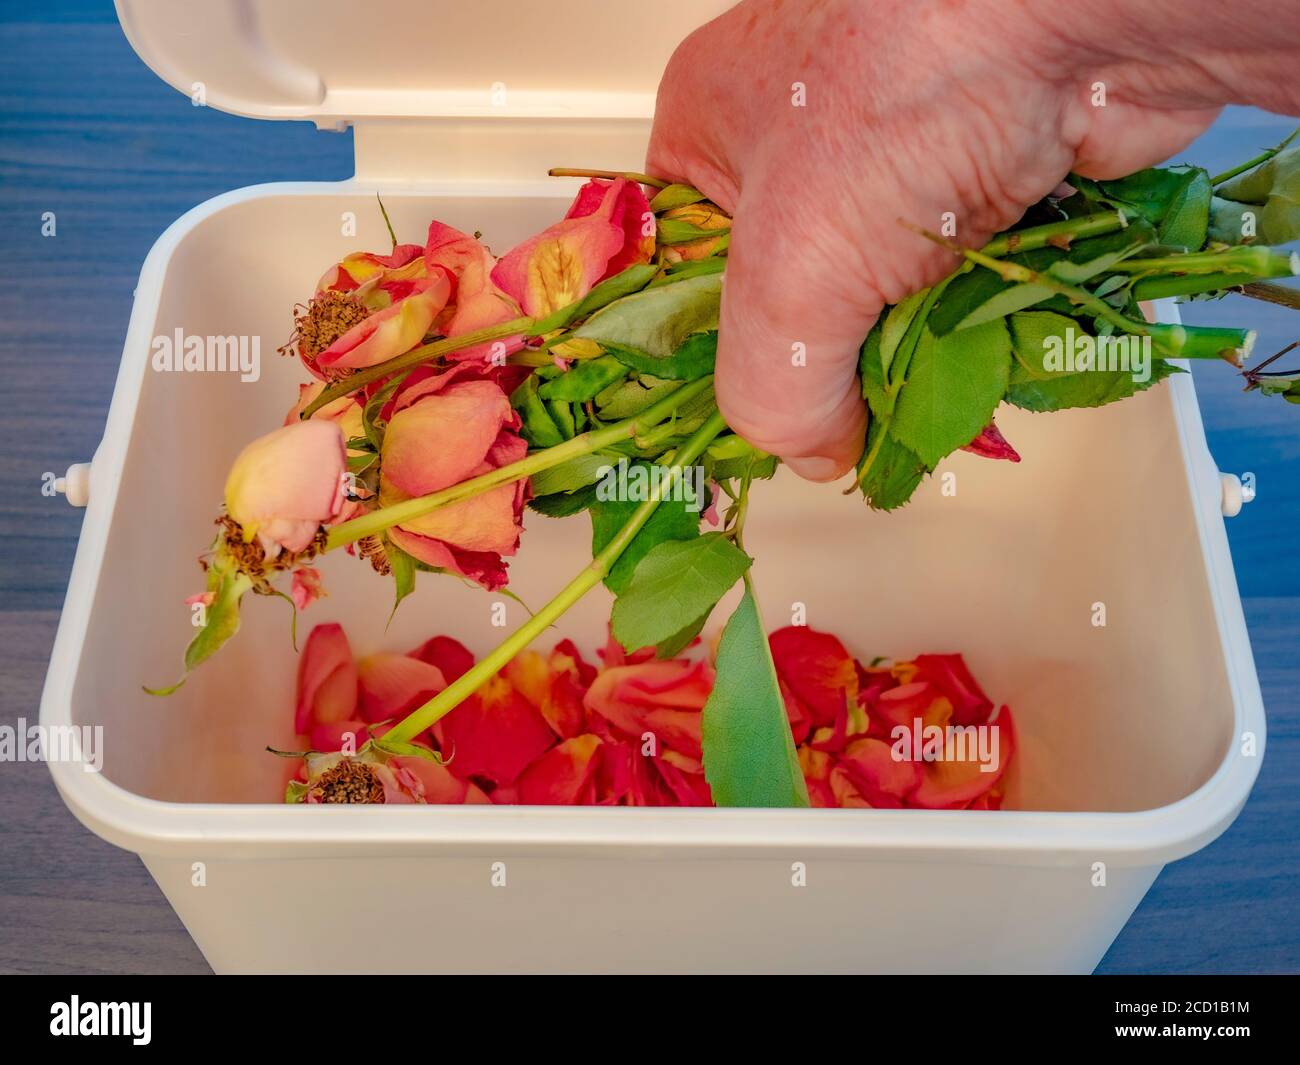 Closeup POV shot of a man’s hand dropping some dead roses and petals into a small plastic compost bin / trash can. Stock Photo